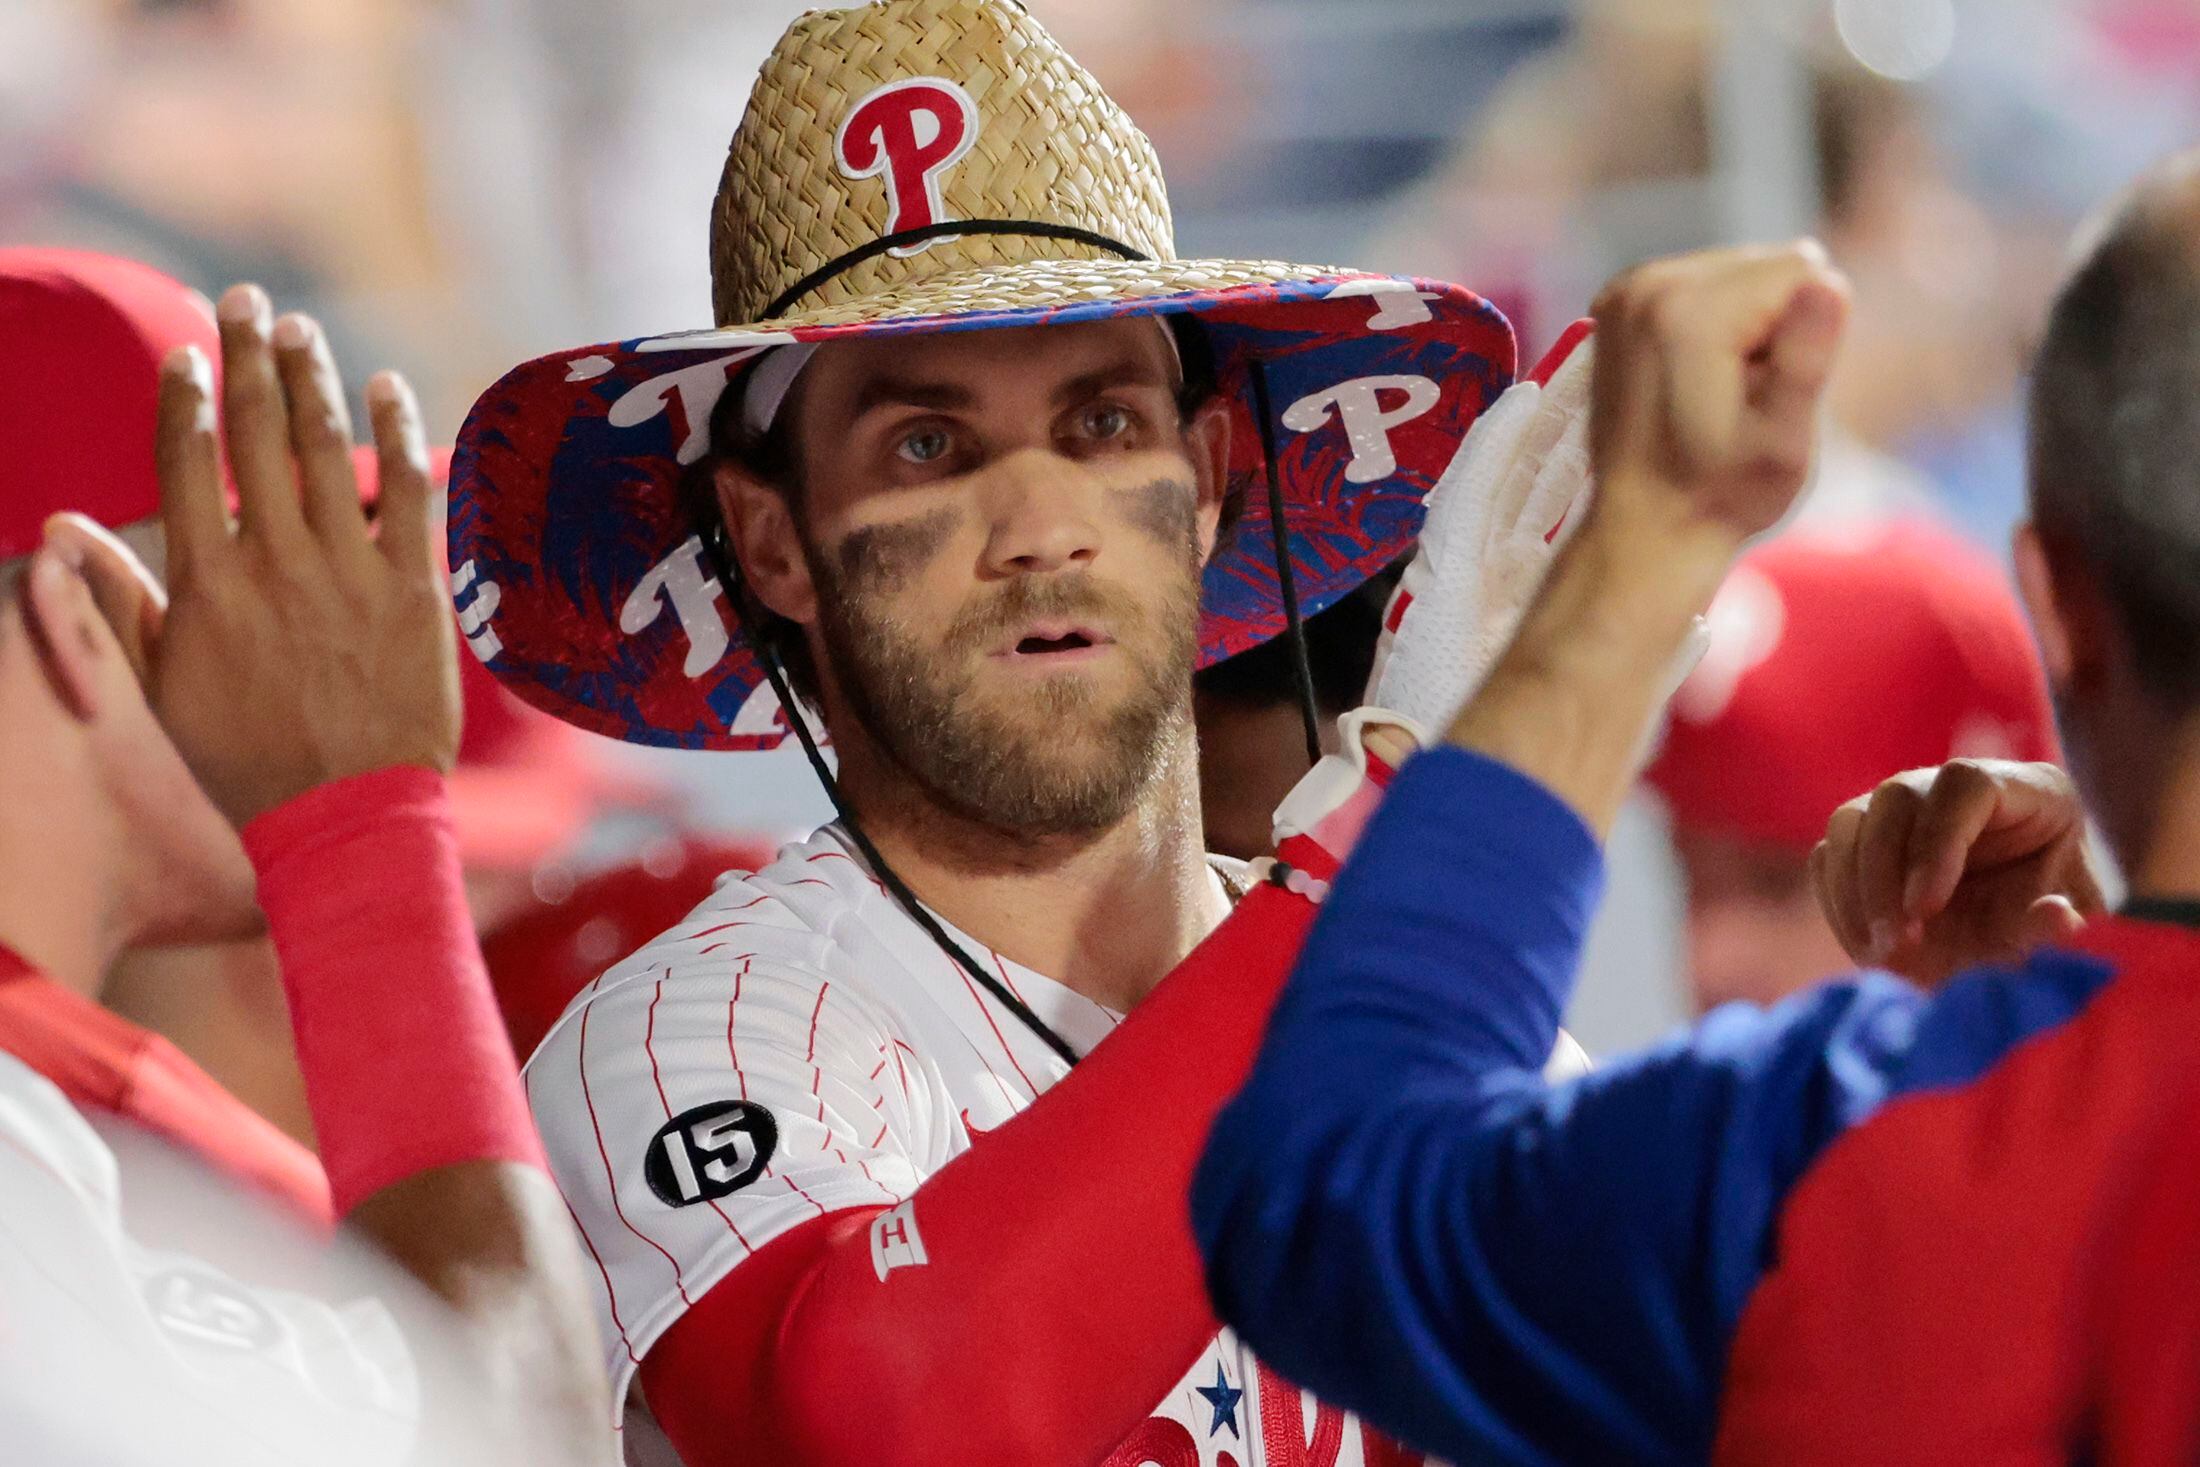 MVP voting was ridiculously unkind to Chase Utley